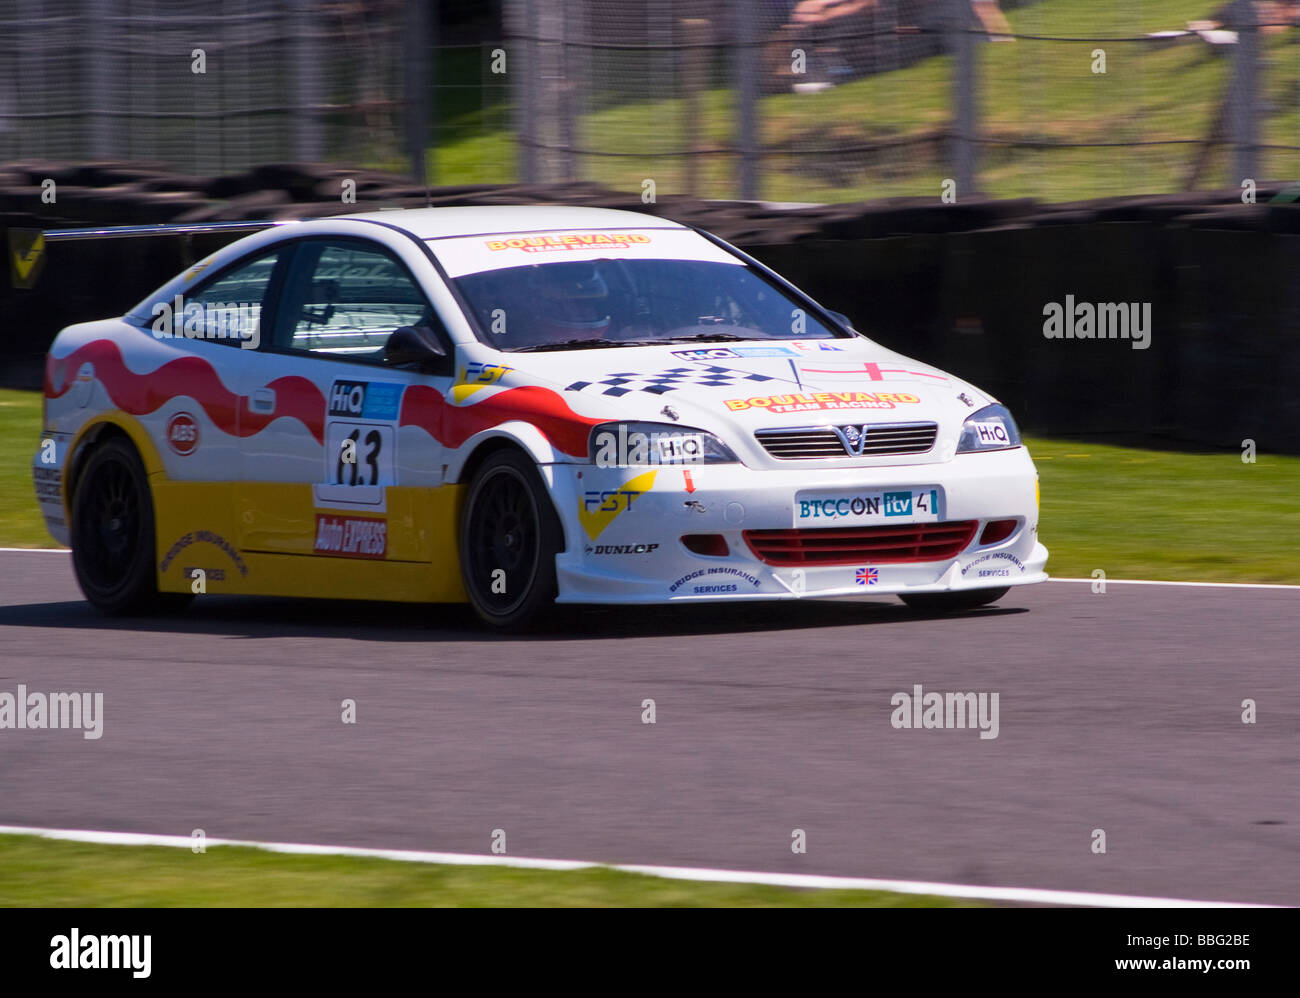 Boulevard Team Racing Vauxhall Astra Coupe Race Car Racing in British Touring Car Championship at Oulton Park Cheshire Stock Photo